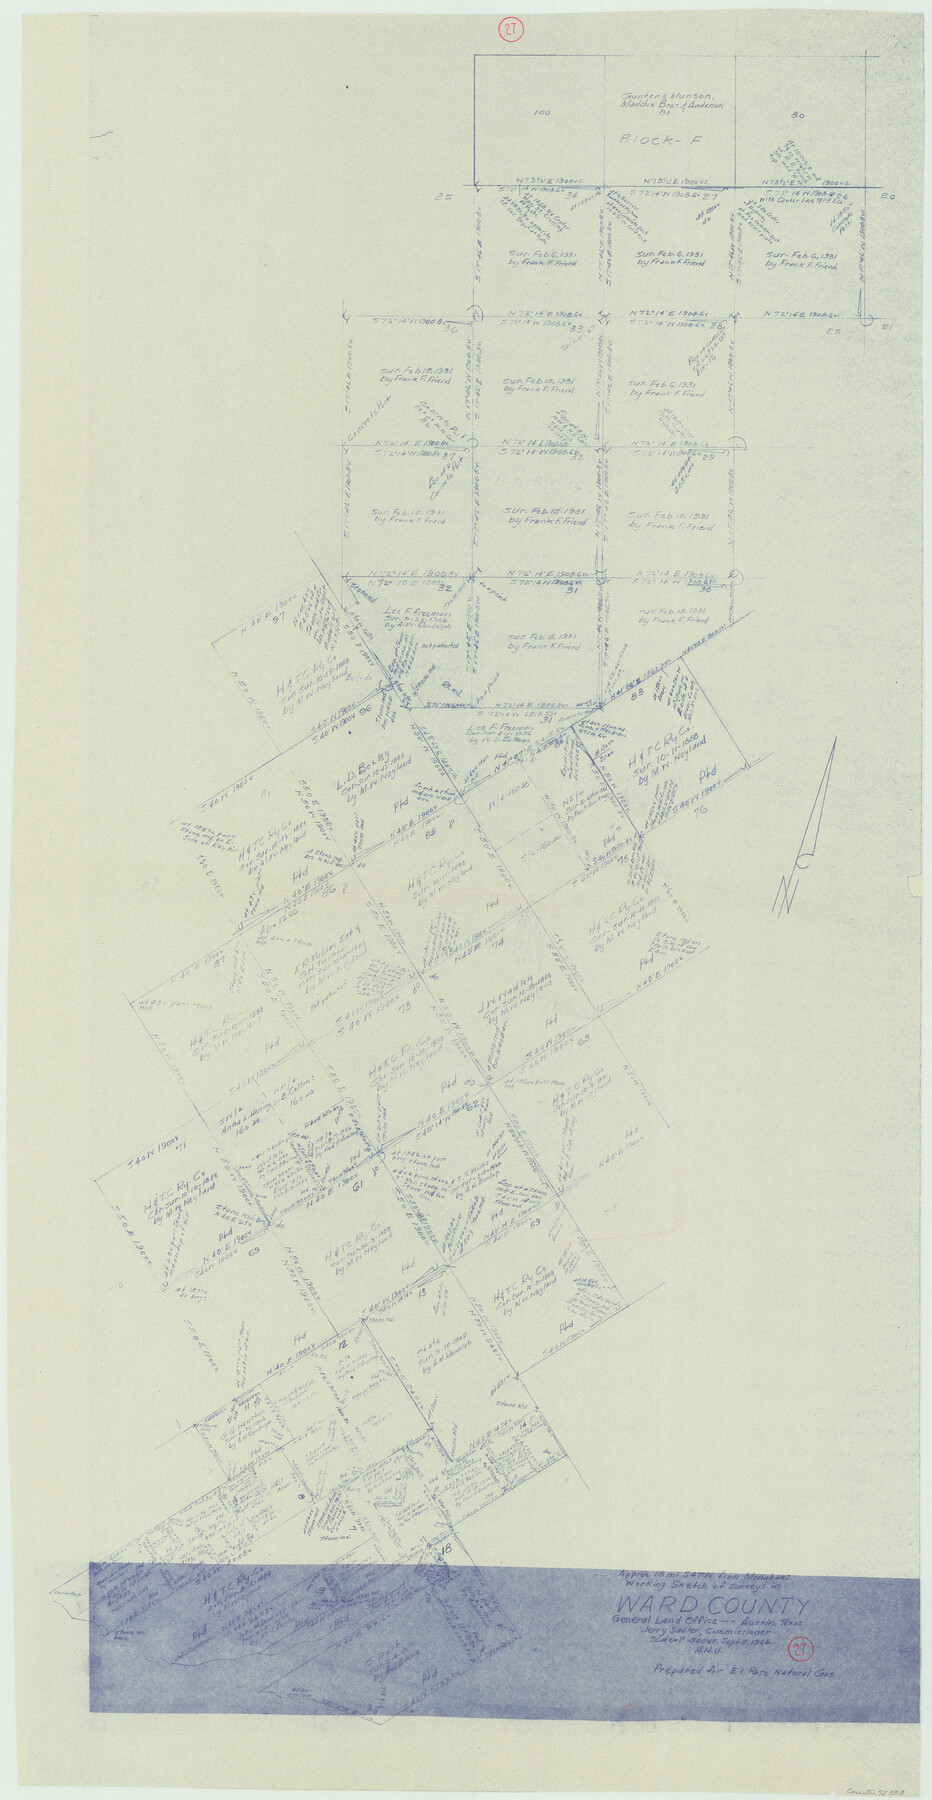 72333, Ward County Working Sketch 27, General Map Collection